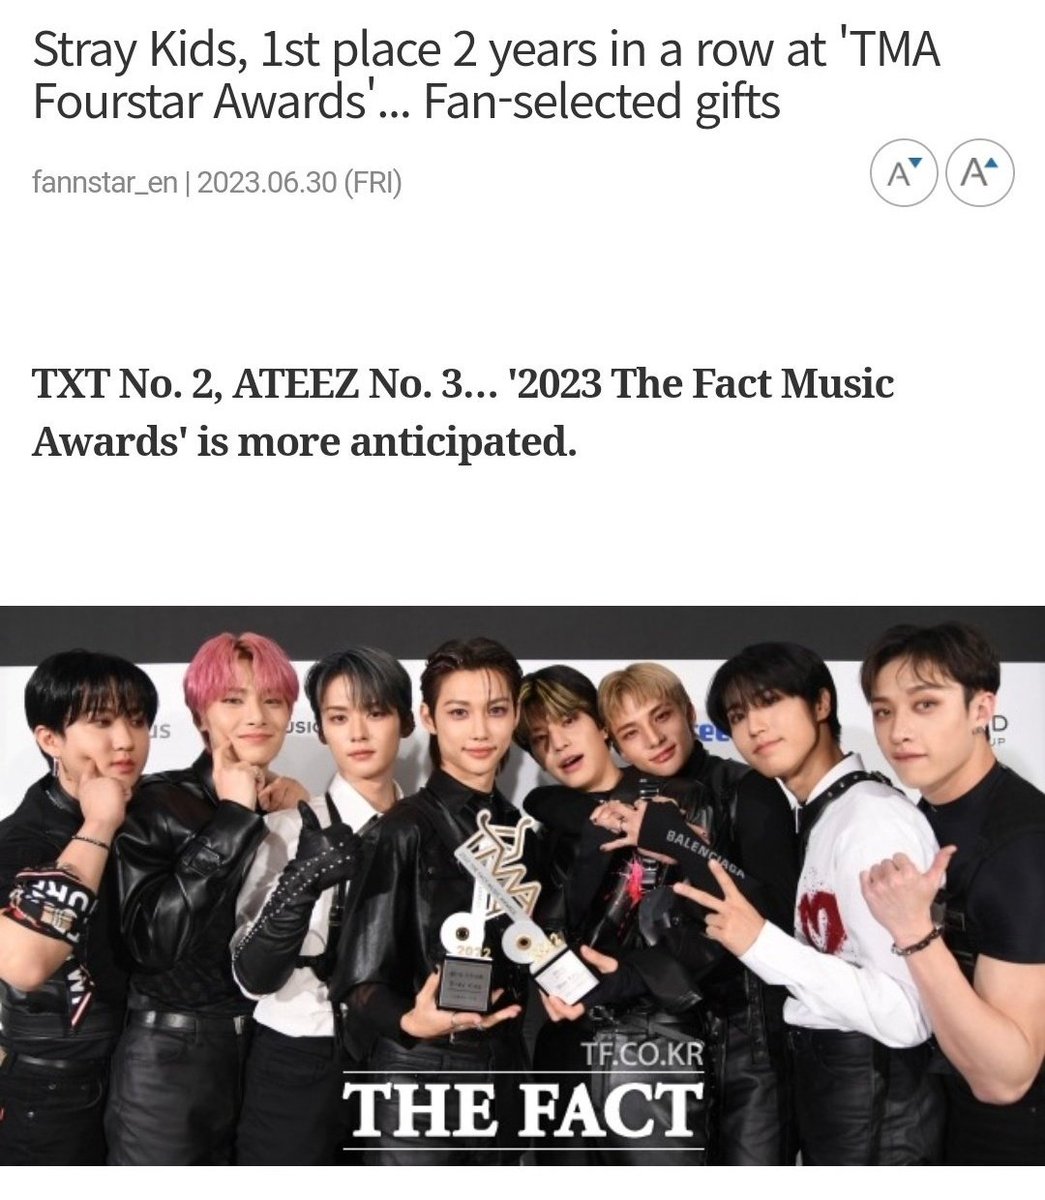 'Stray Kids, 1st Place 2 years in a row at TMA Fourstar Awards'... Fansl-selected gifts

Mind you, stays started to vote on Fannstar 2 weeks ago, after the 5-star promotion ended and we managed to win with a BIG GAP 😭 Sending hugs to all stays 🫂